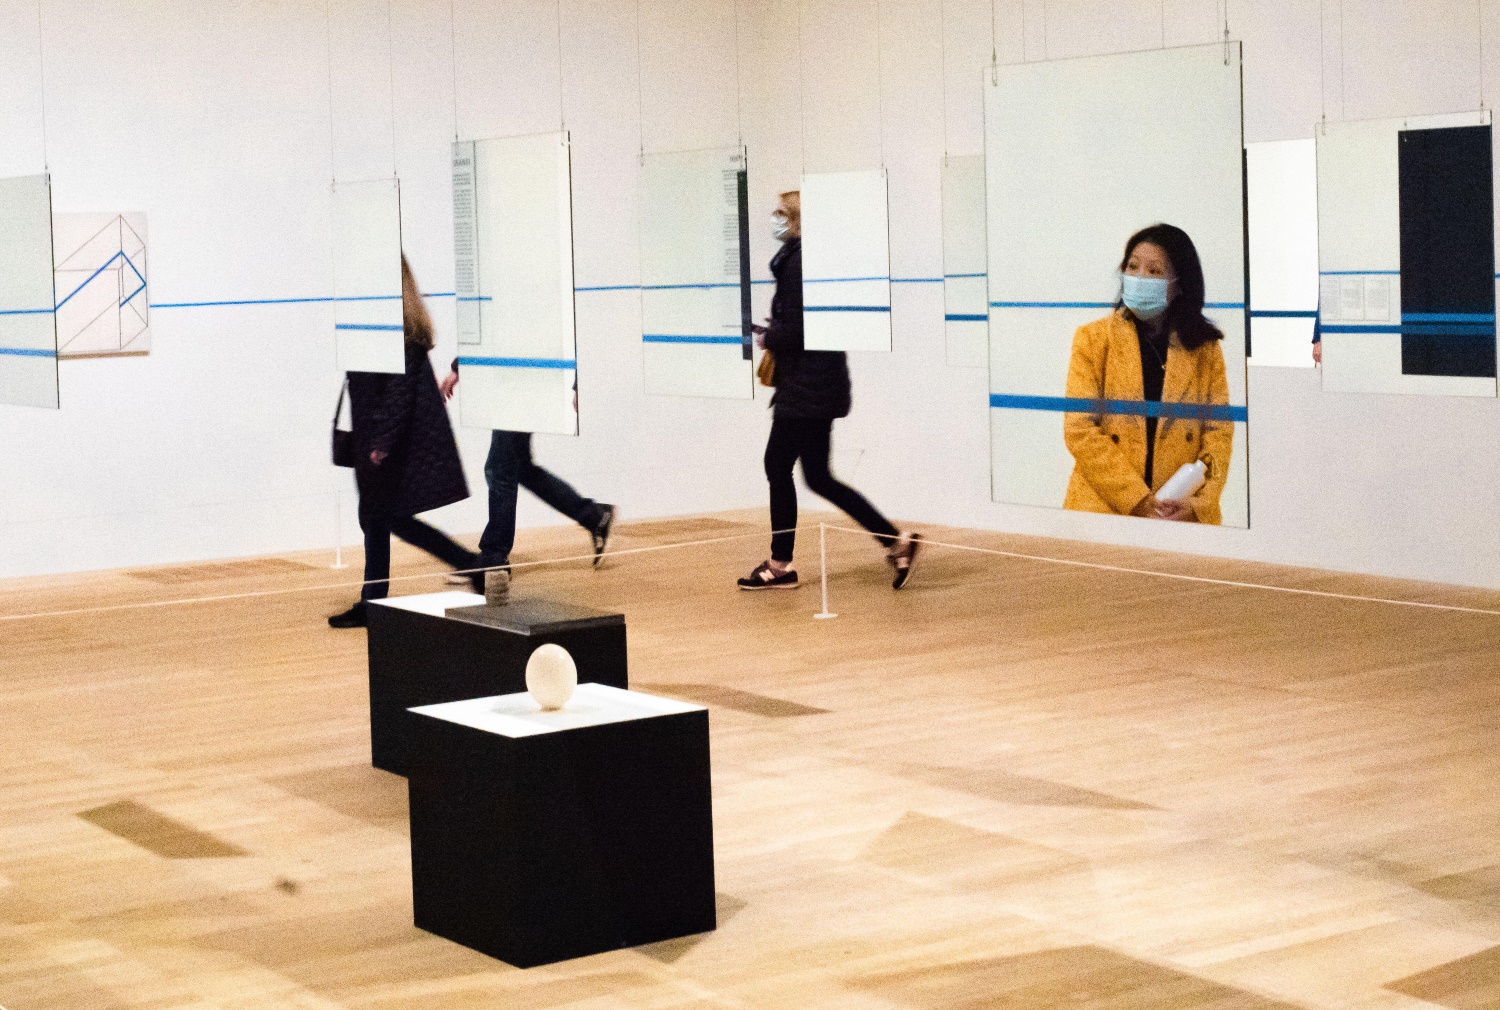  Four people walk around a contemporary art display consisting of mirrors and sockets. The face of one person is reflected by the mirror.